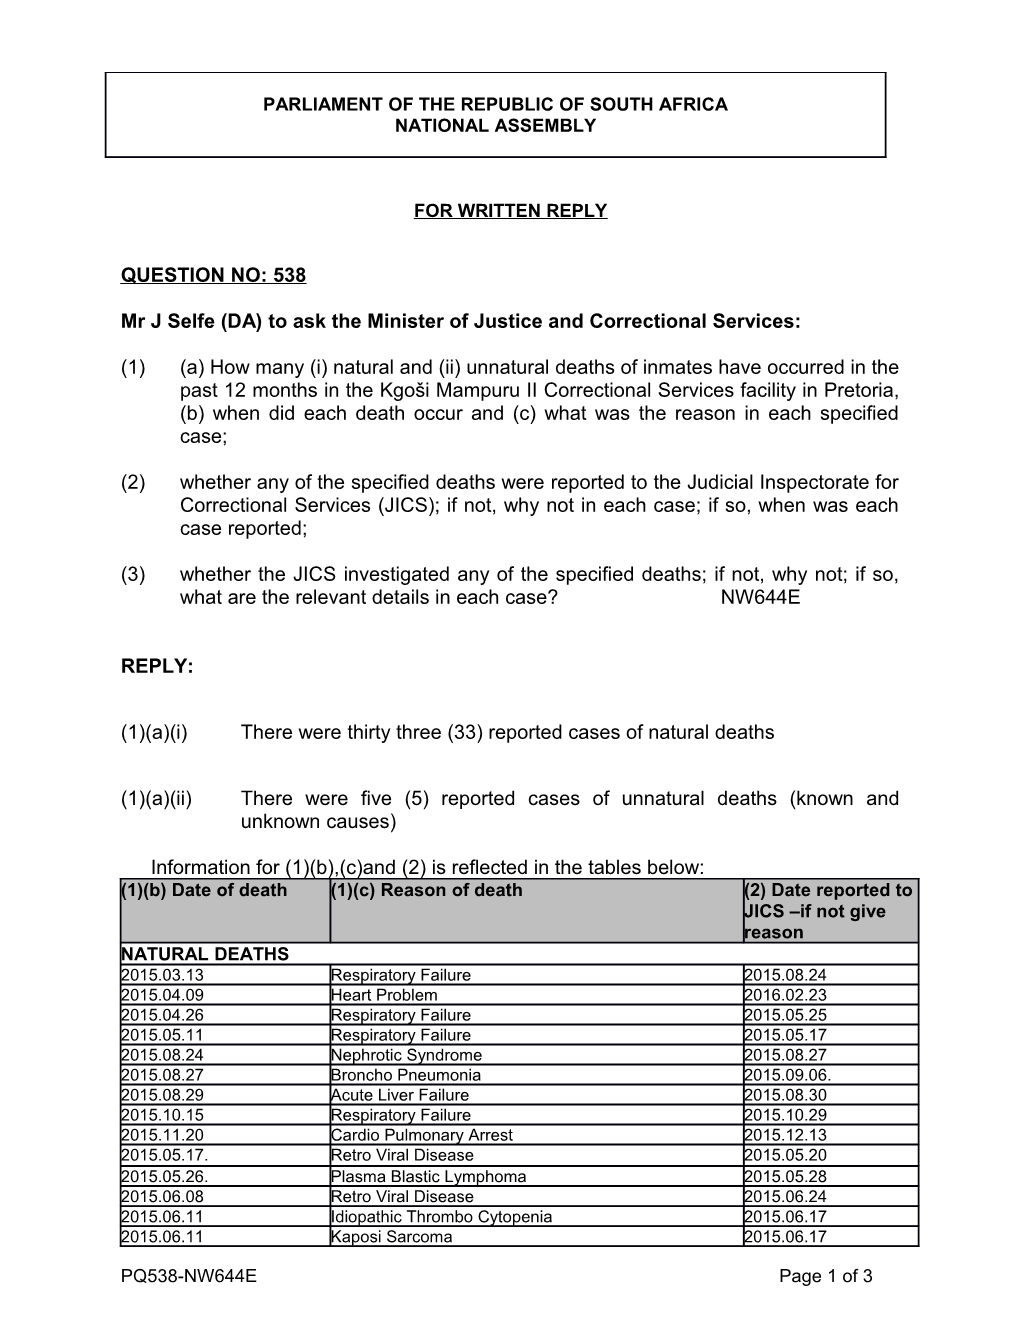 Mr J Selfe (DA) to Ask the Minister of Justice and Correctional Services